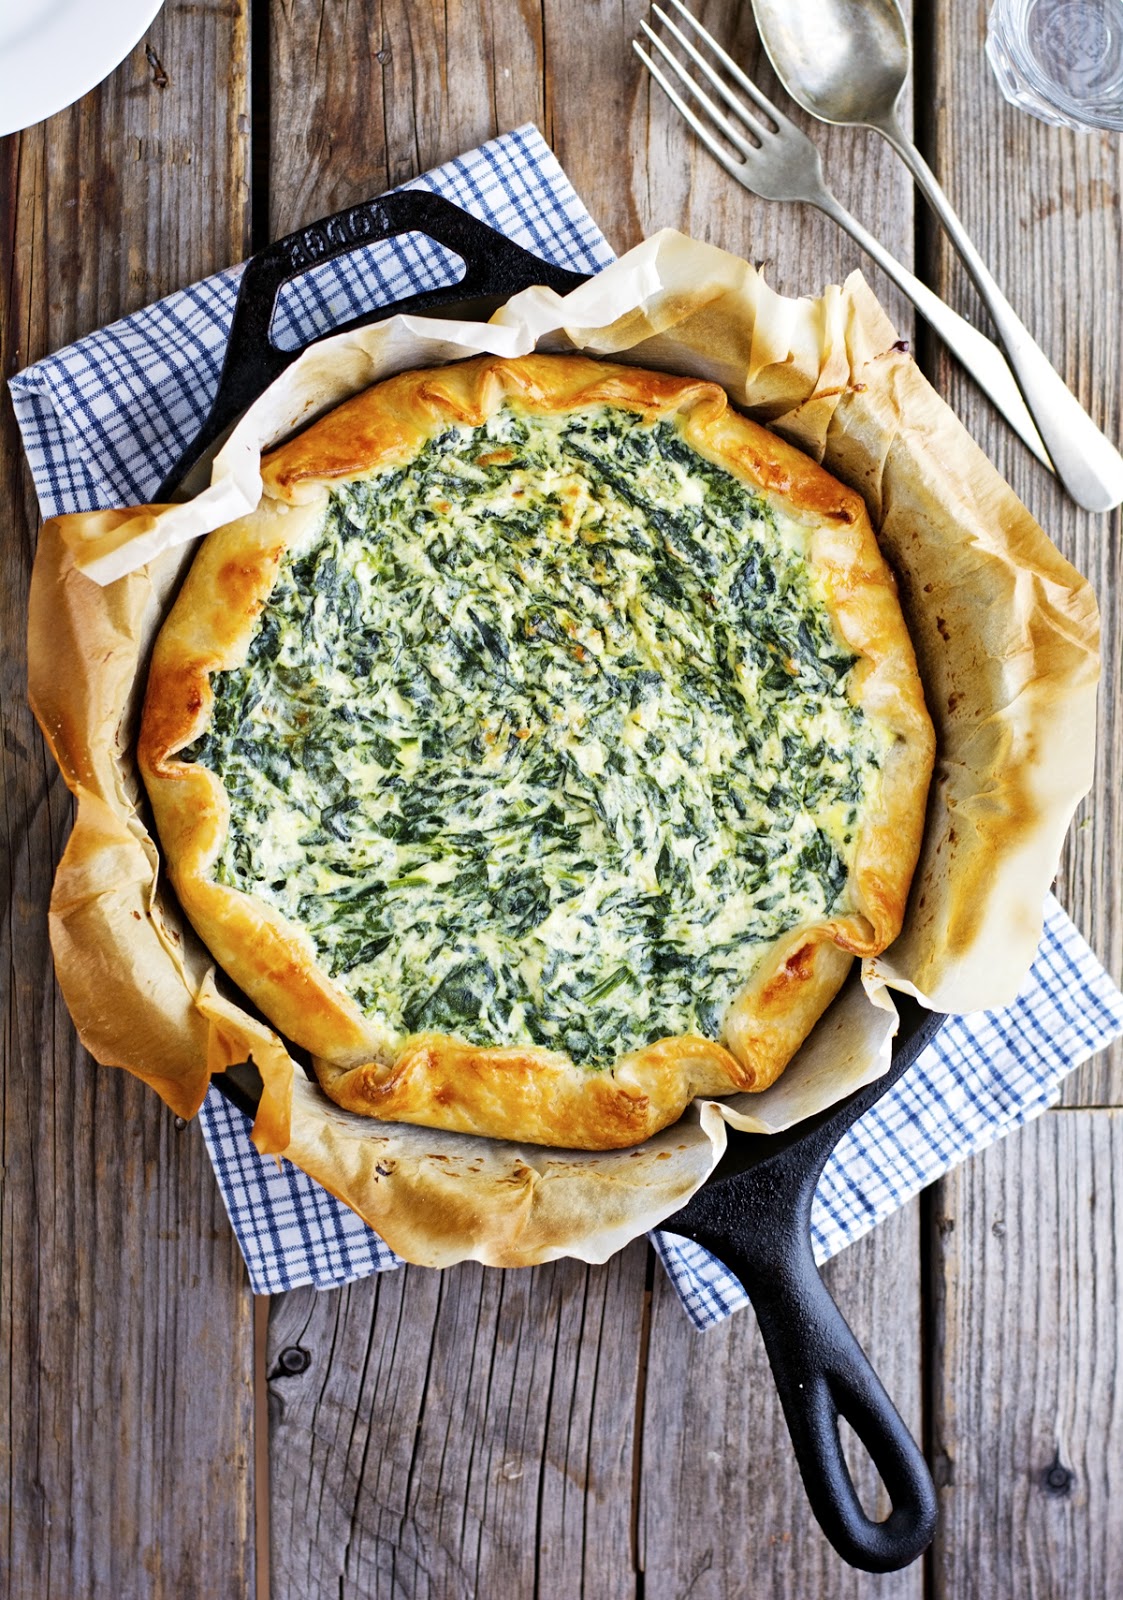 Make-ahead holiday breakfast recipes: Easy Spinach Ricotta Quiche | The Iron You